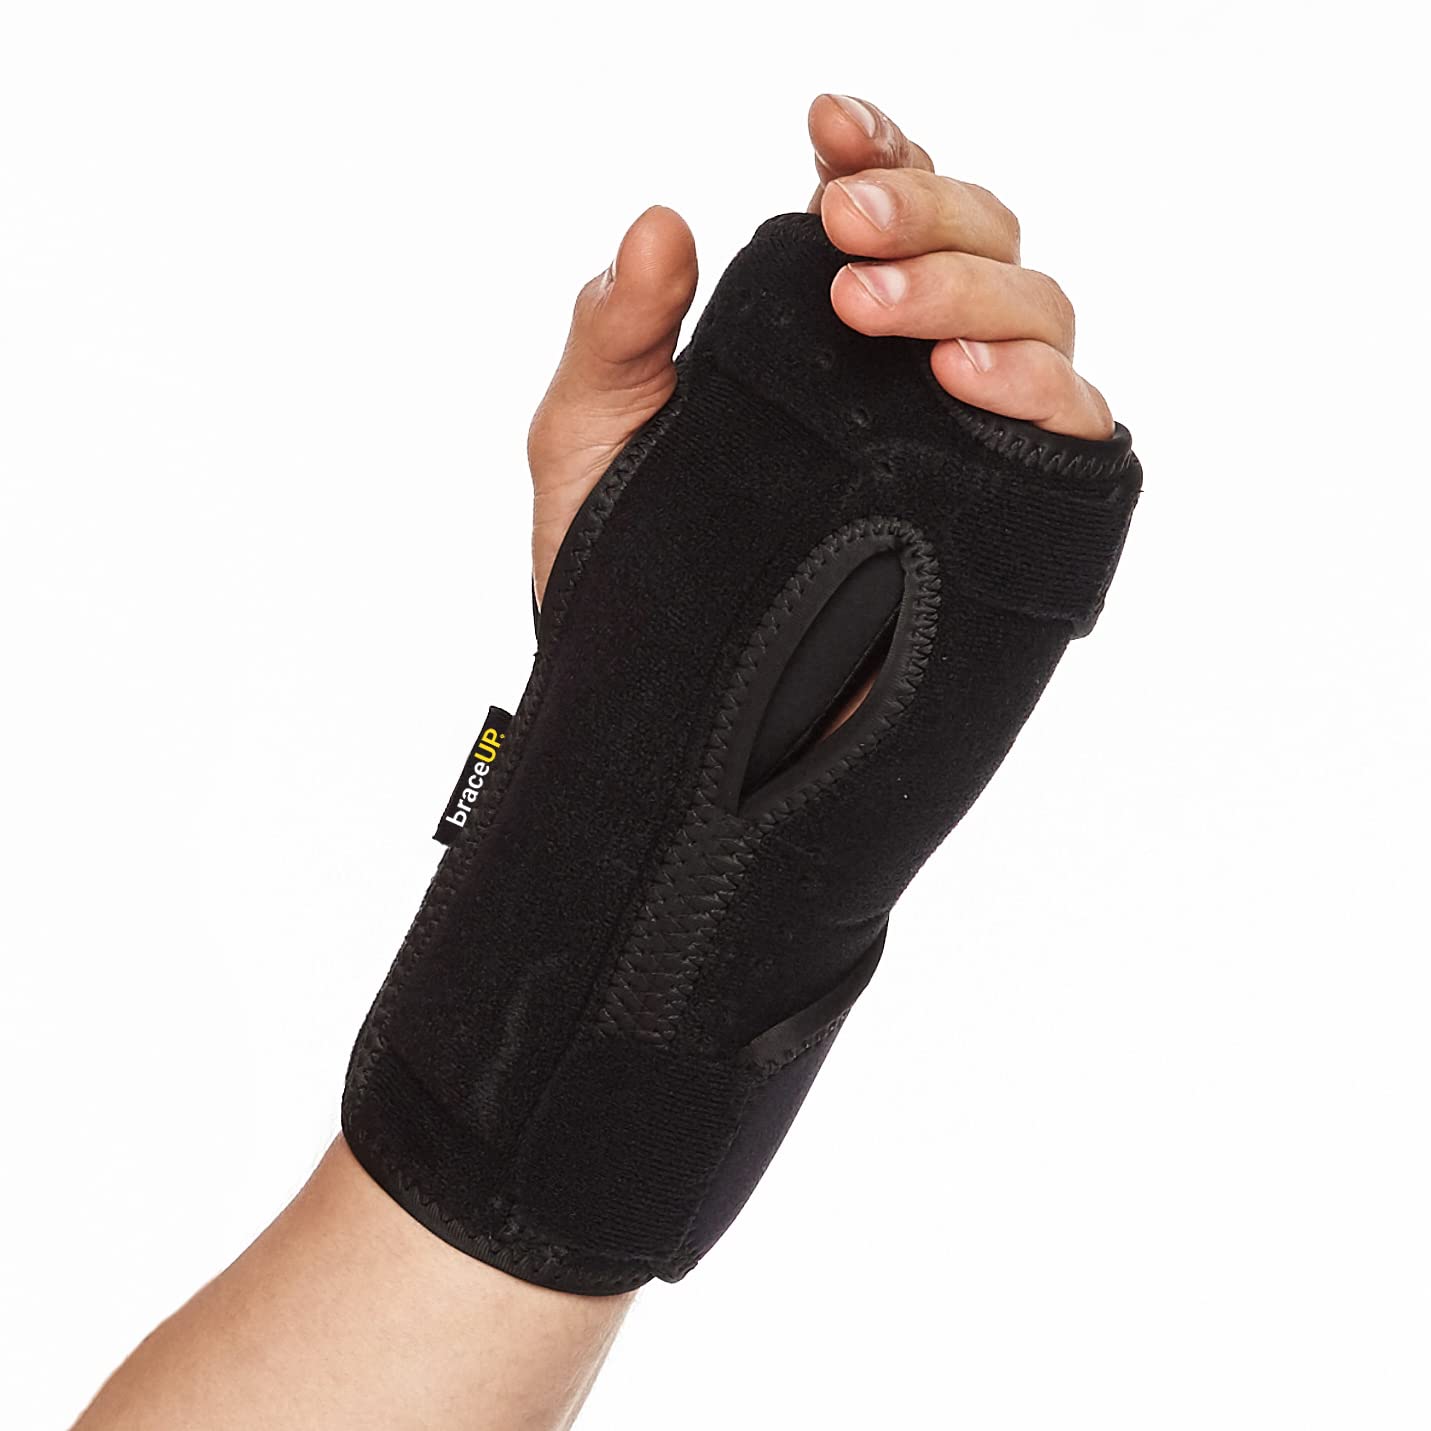 Night Sleep Wrist Support Brace by BraceUP for Men and Women - Lightweight  Splint with Cushioned Pads for Pregnancy Carpal Tunnel, Hand Support, and  Tendonitis Arthritis Pain Relief